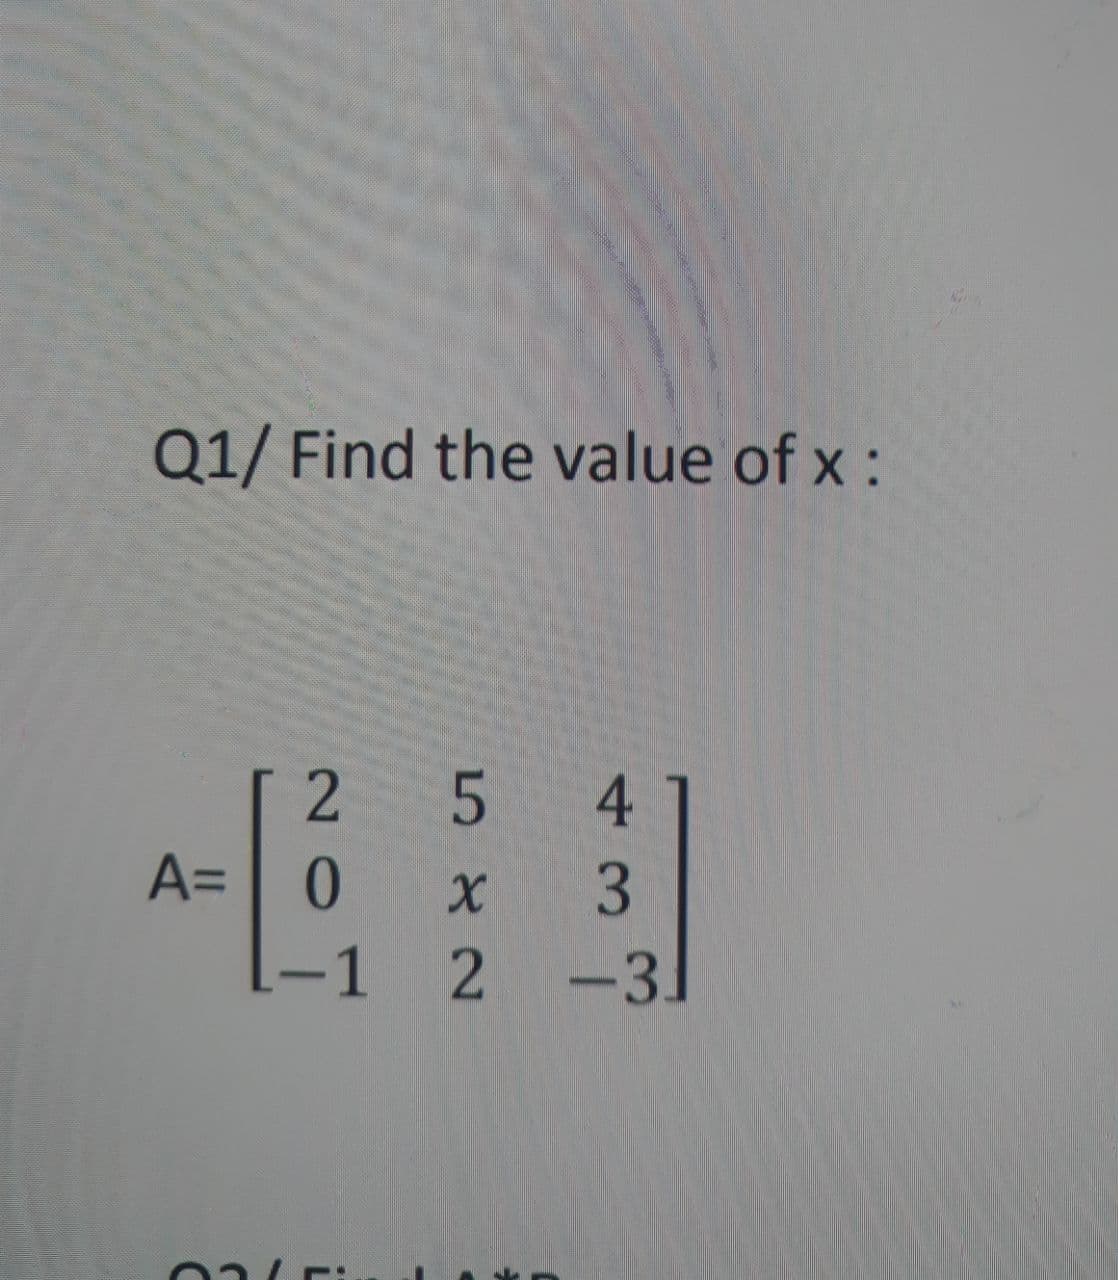 Q1/ Find the value of x :
5 4
A= 0
[-1 2 -3.
3.
